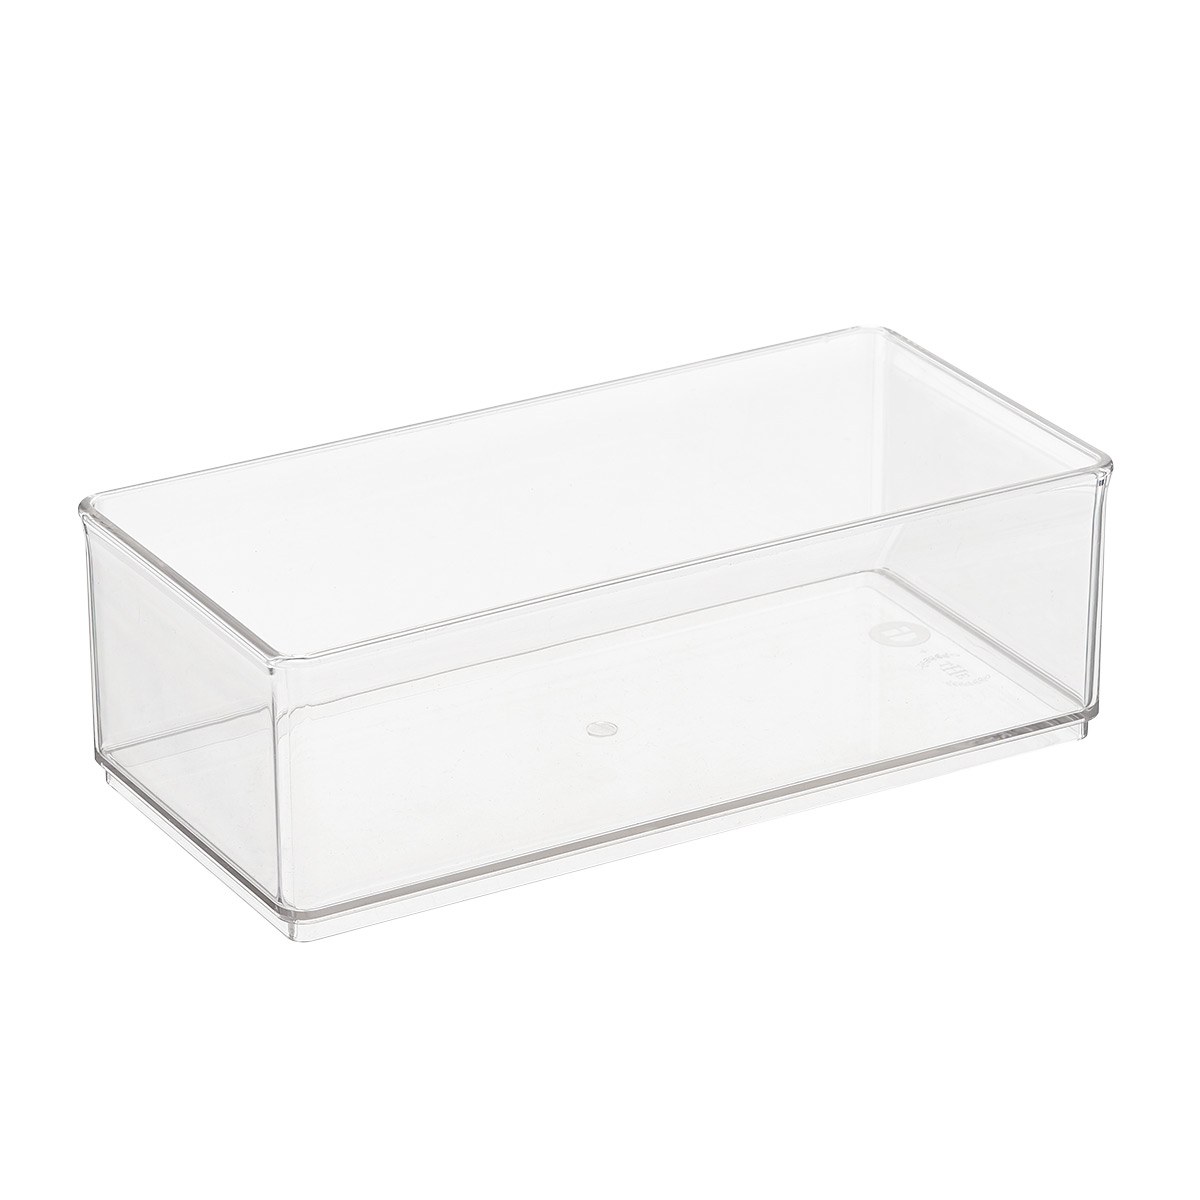 https://images.containerstore.com/catalogimages/364024/10077089-T.H.E.-bin-organizer-4.5x9..jpg